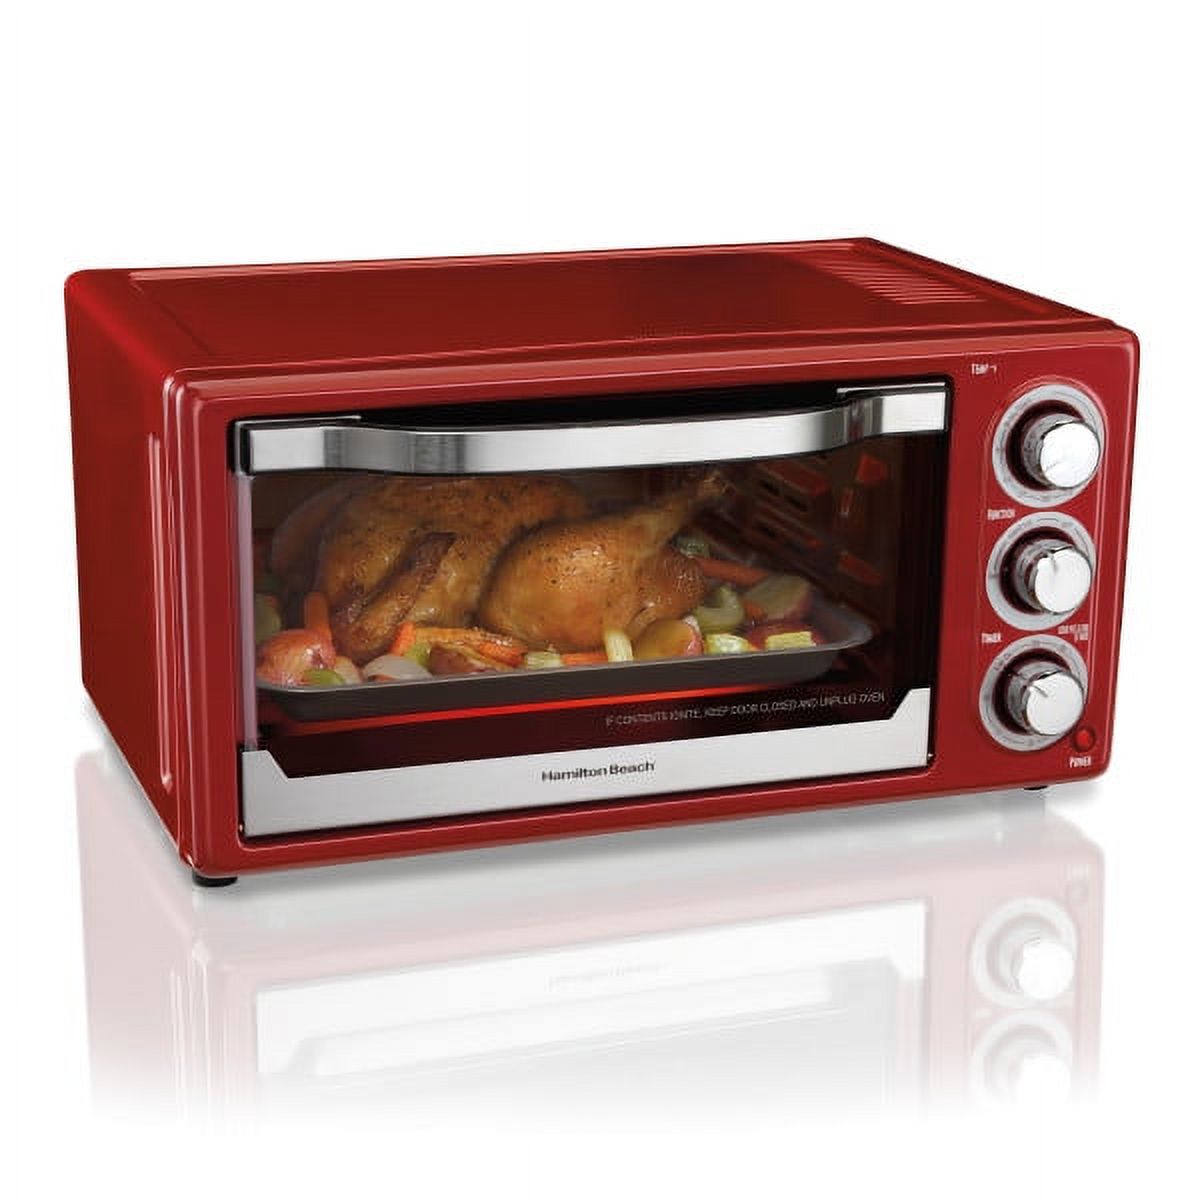 Hamilton Beach 6 Slice Toaster Convection/Broiler Oven | Red Model# 31514 - image 1 of 6